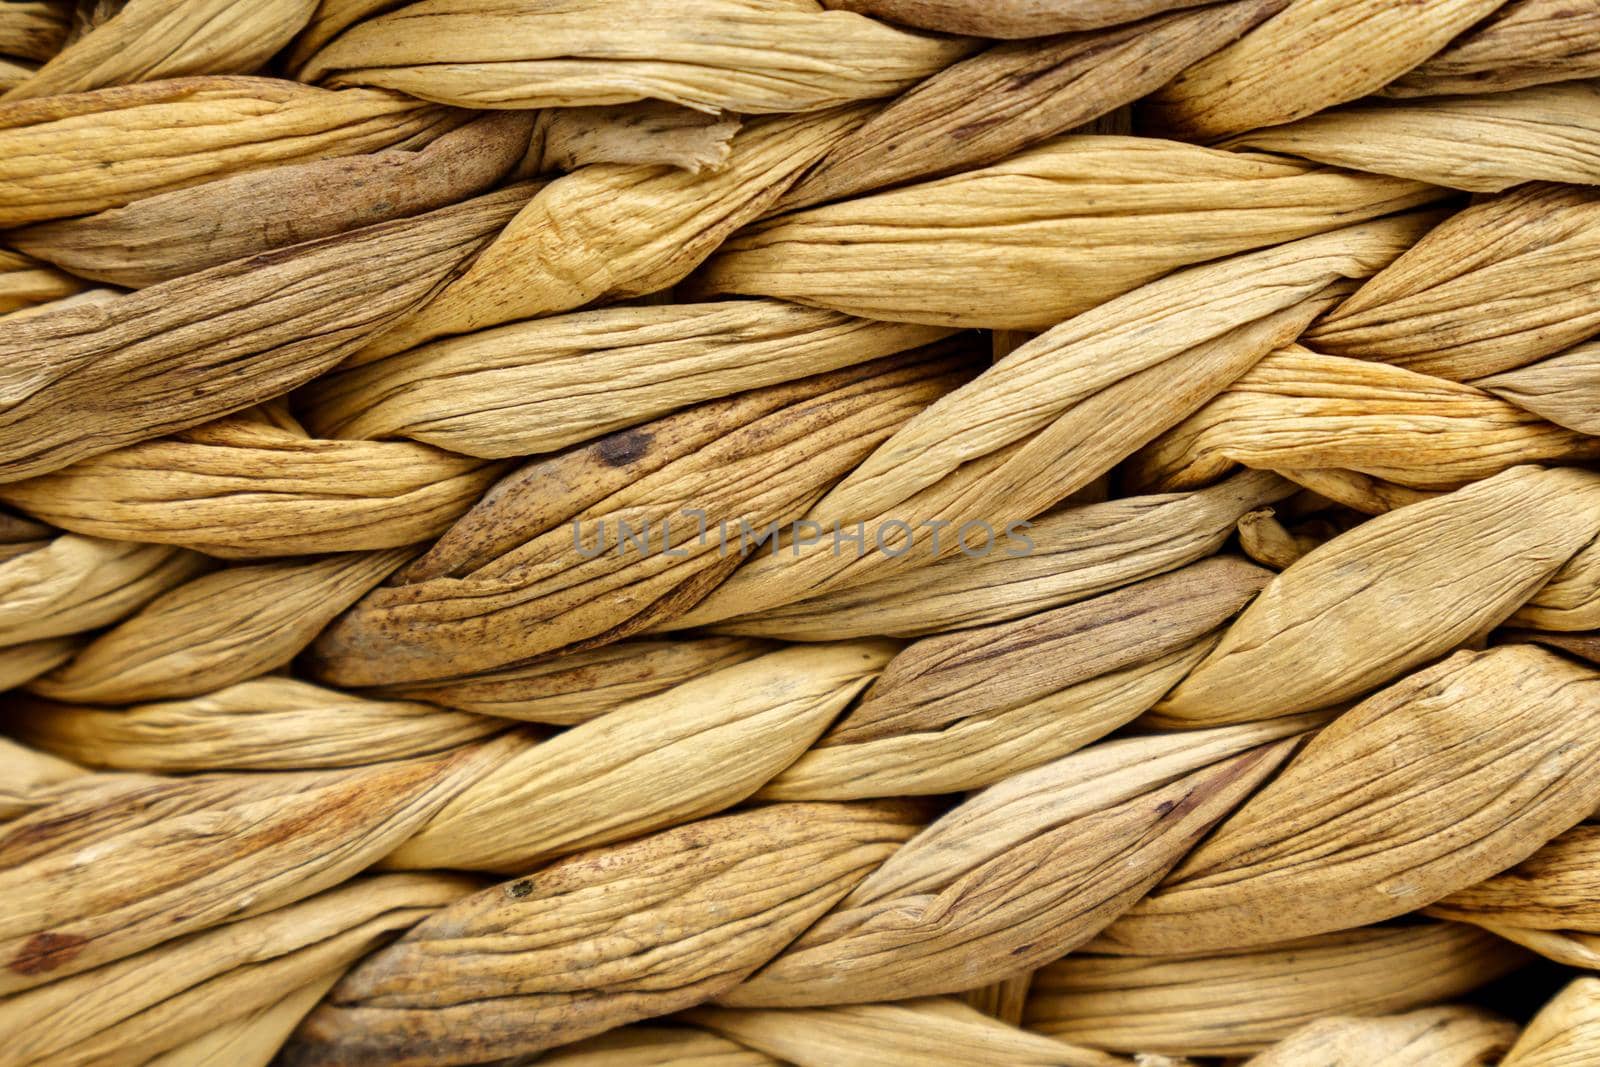 Texture of woven beige straw, background of braids from the plant stem close-up. Selective focus